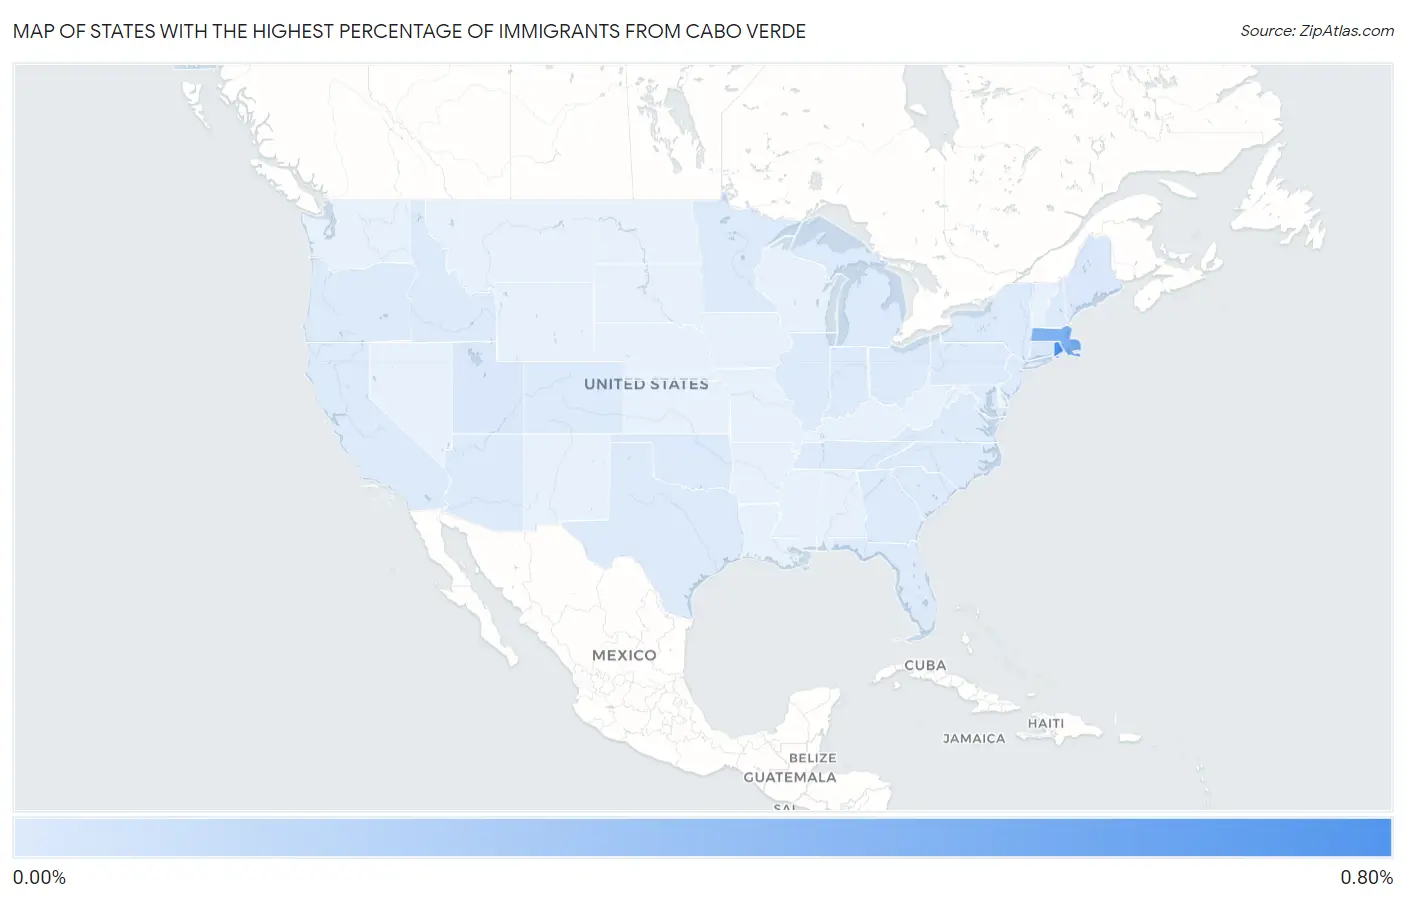 States with the Highest Percentage of Immigrants from Cabo Verde in the United States Map